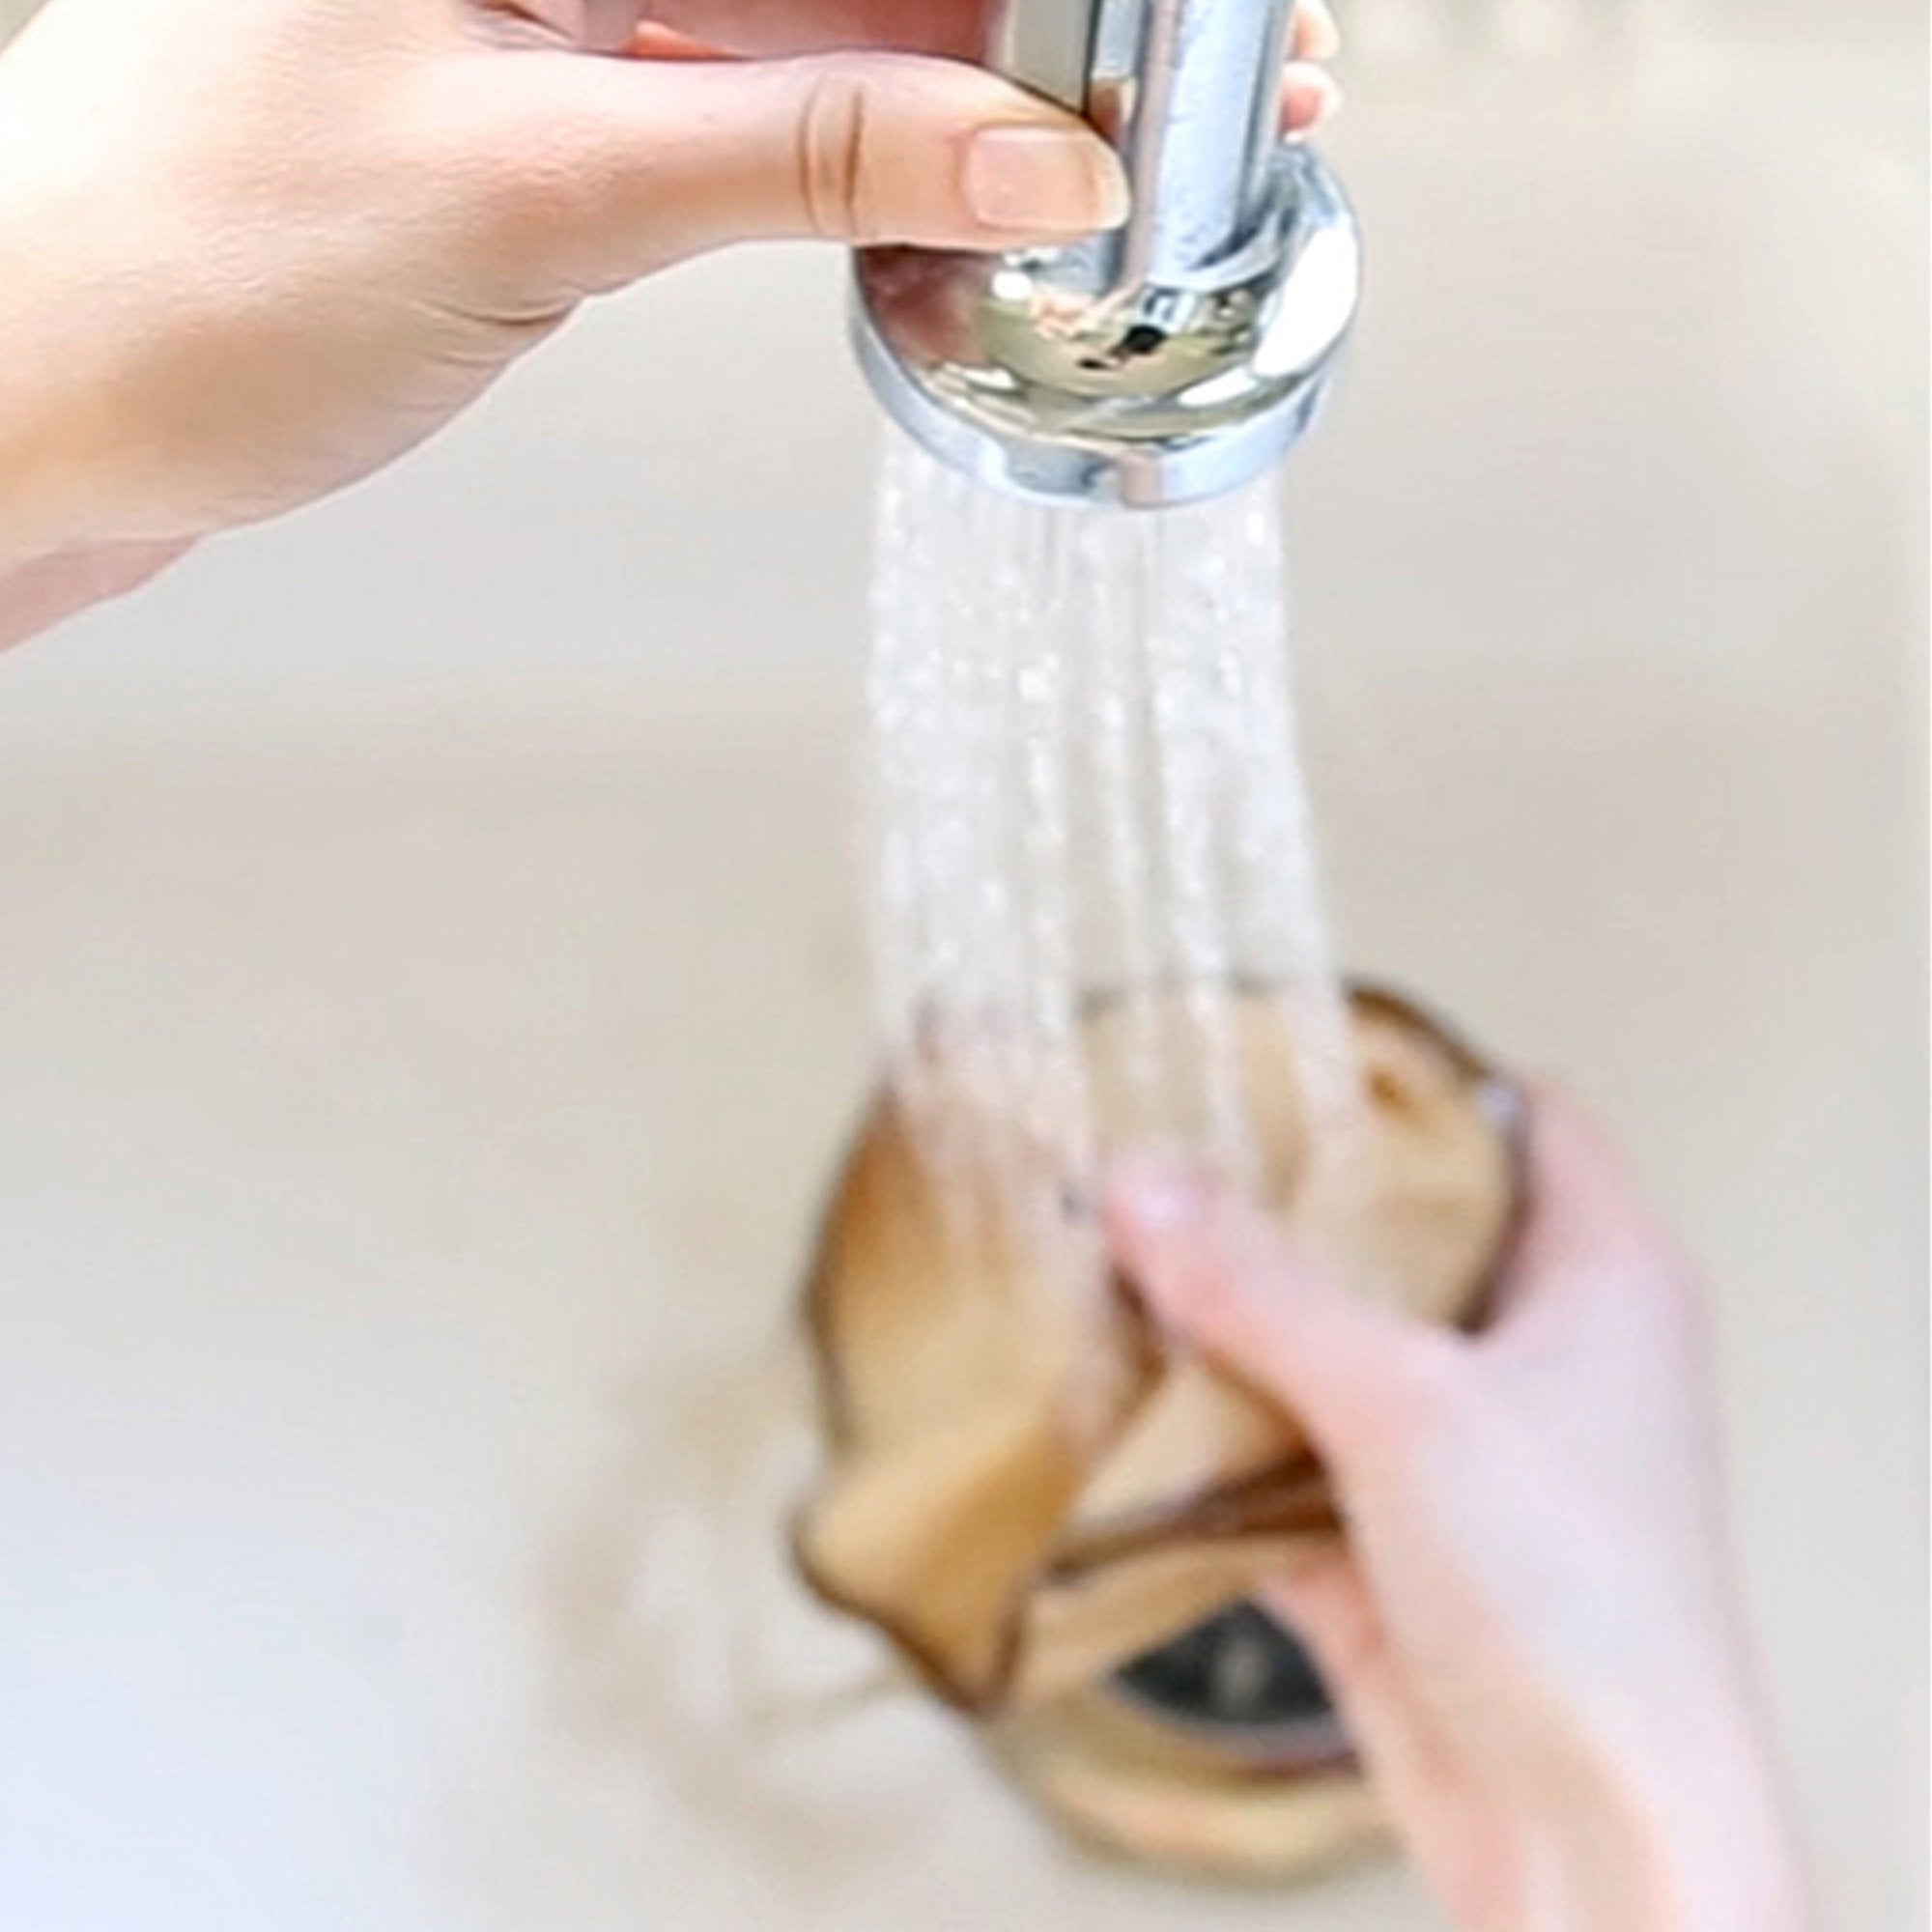 two hands washing reusable coffee filter in sink under faucet